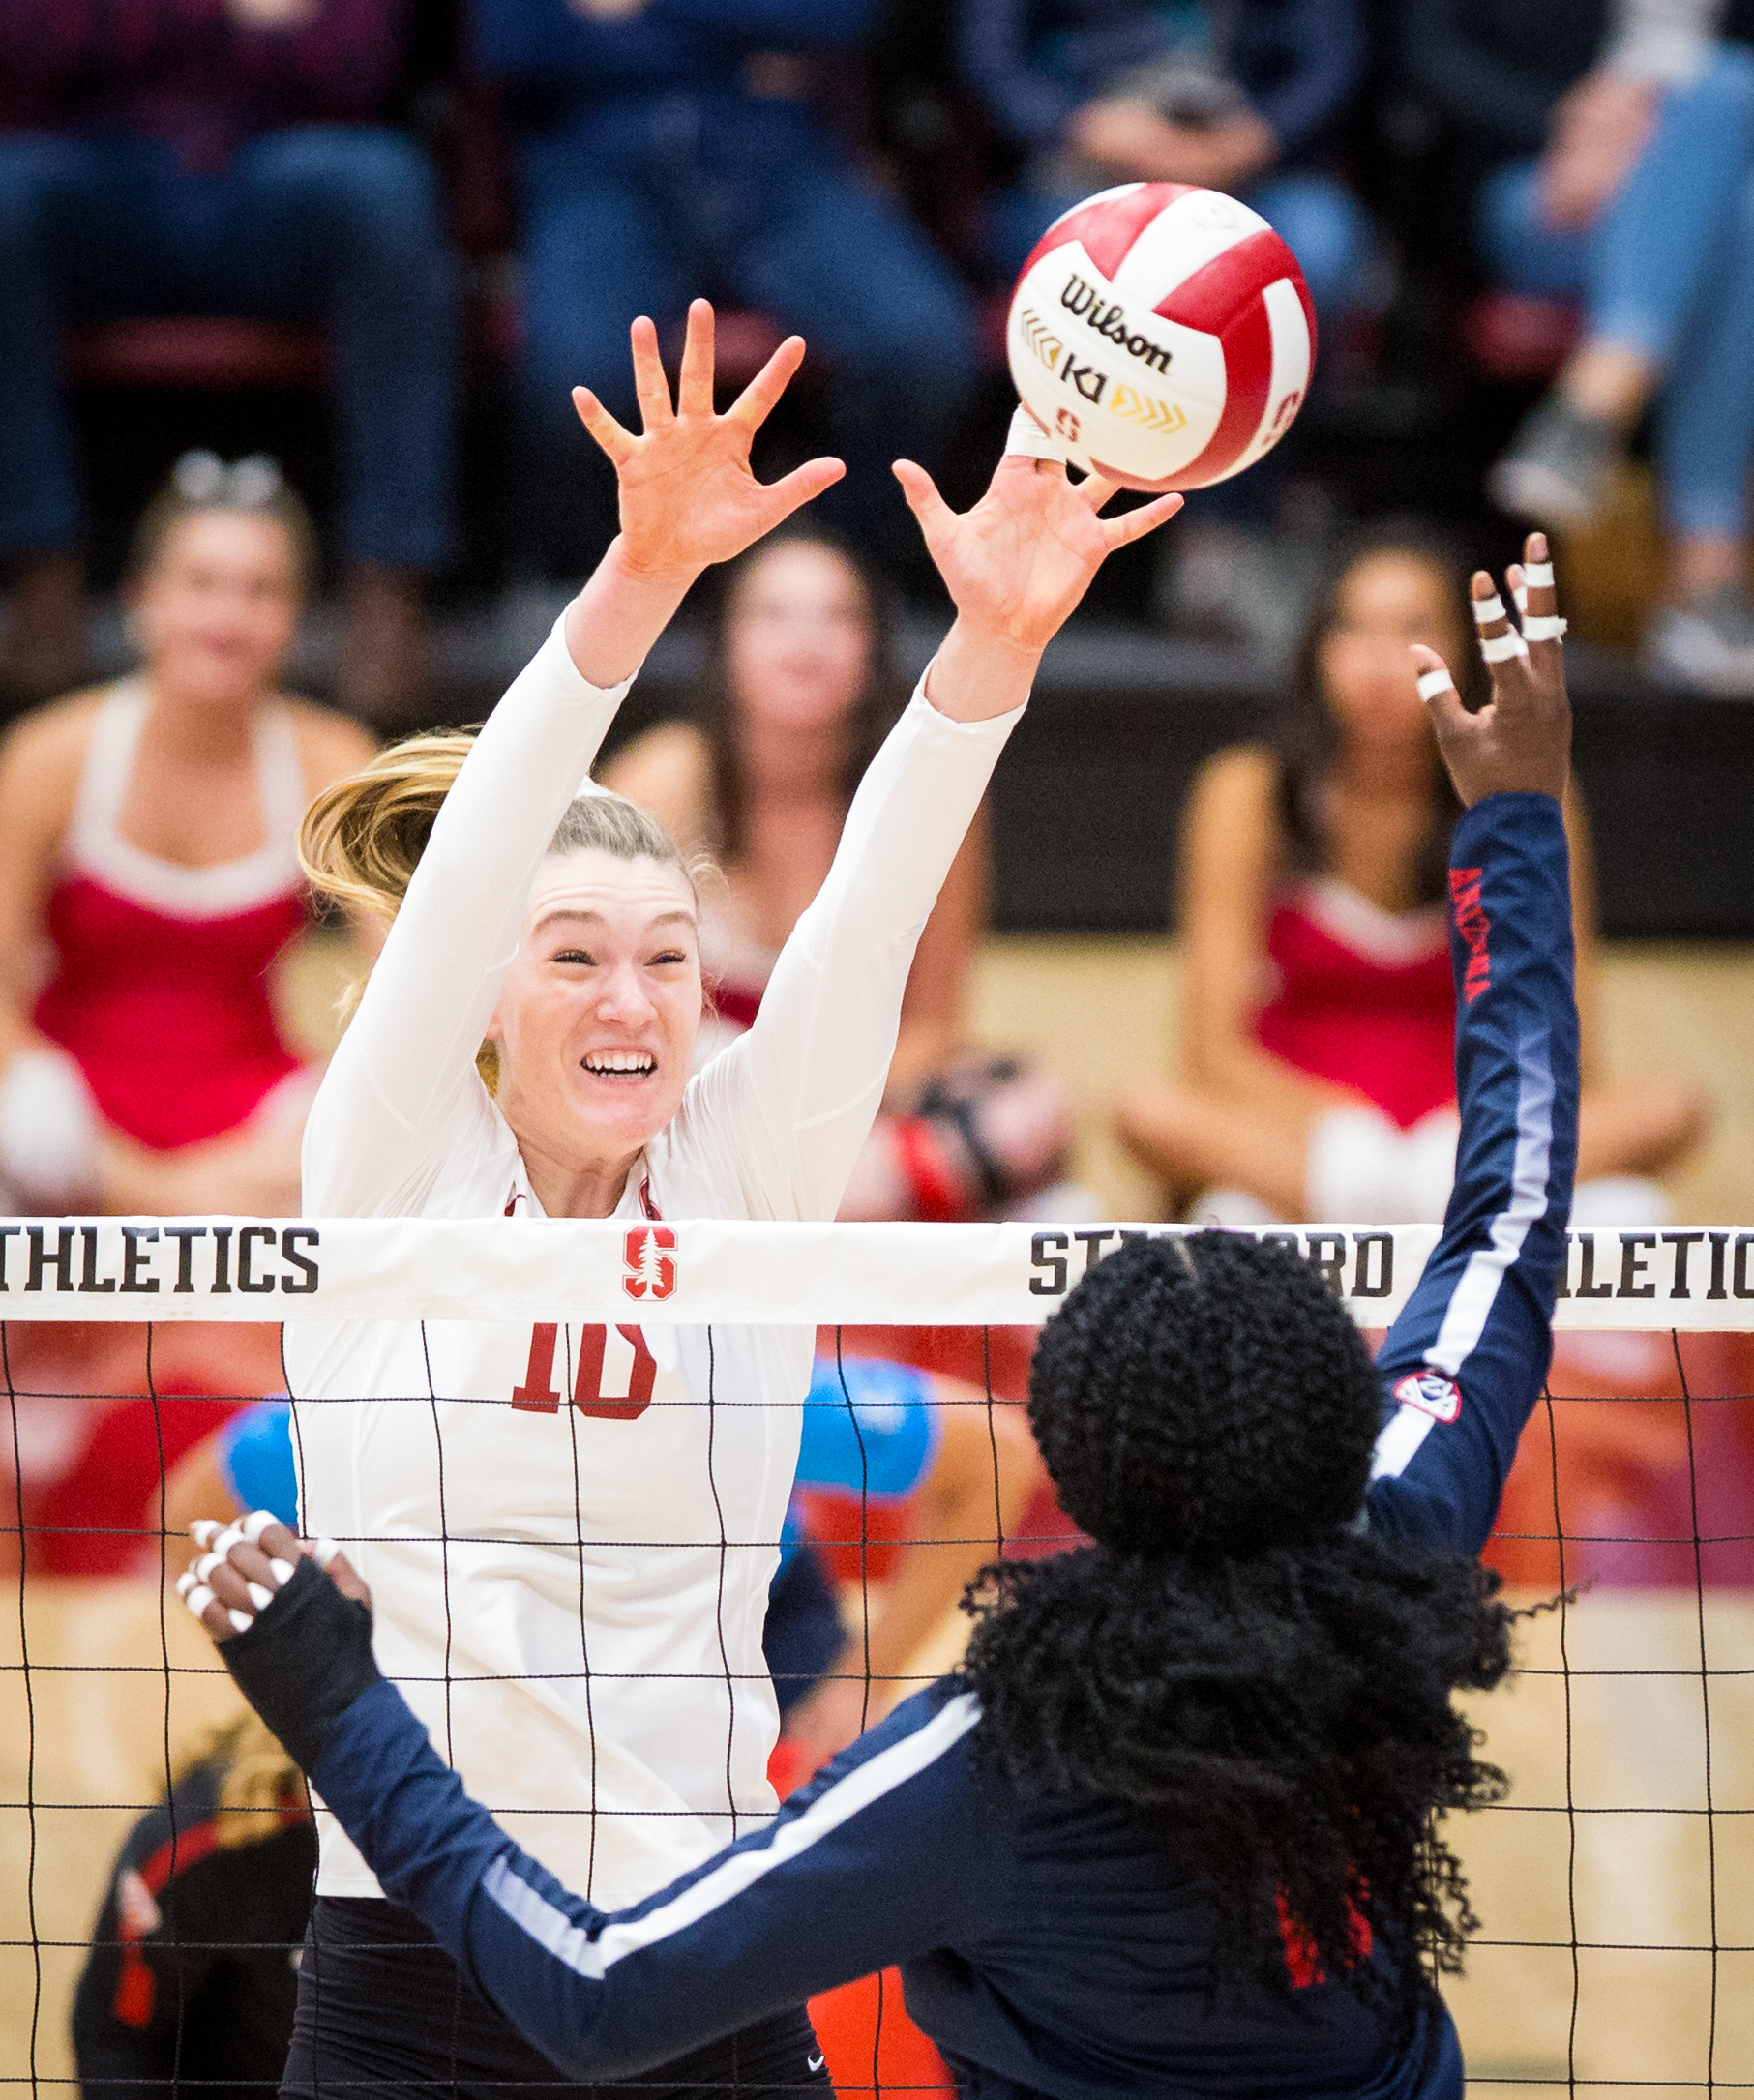 Women's volleyball swept by Wildcats